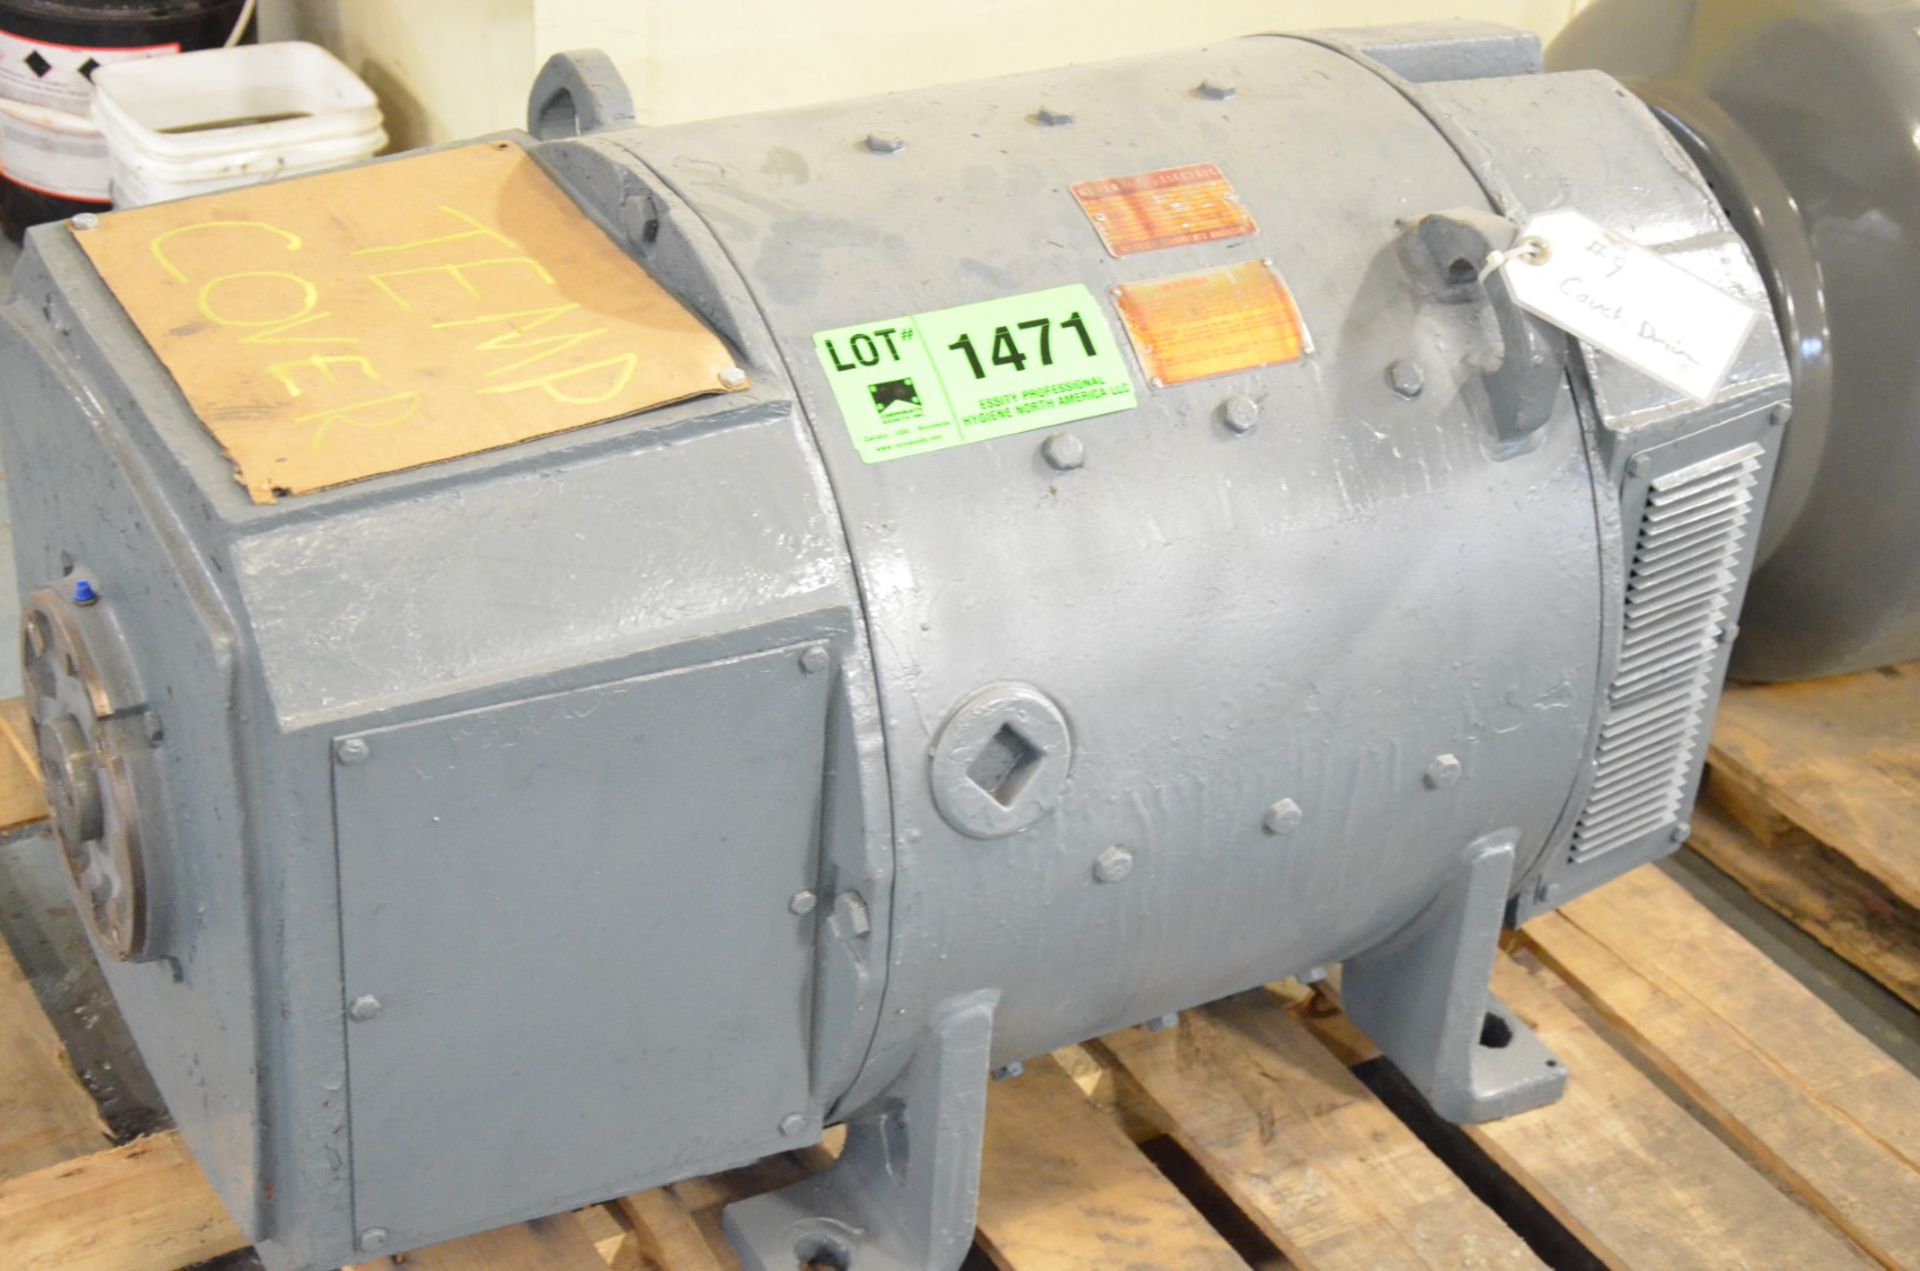 GE 150 HP 2000 RPM 460V ELECTRIC MOTOR [RIGGING FEE FOR LOT #1471 - $50 USD PLUS APPLICABLE TAXES] - Image 2 of 3